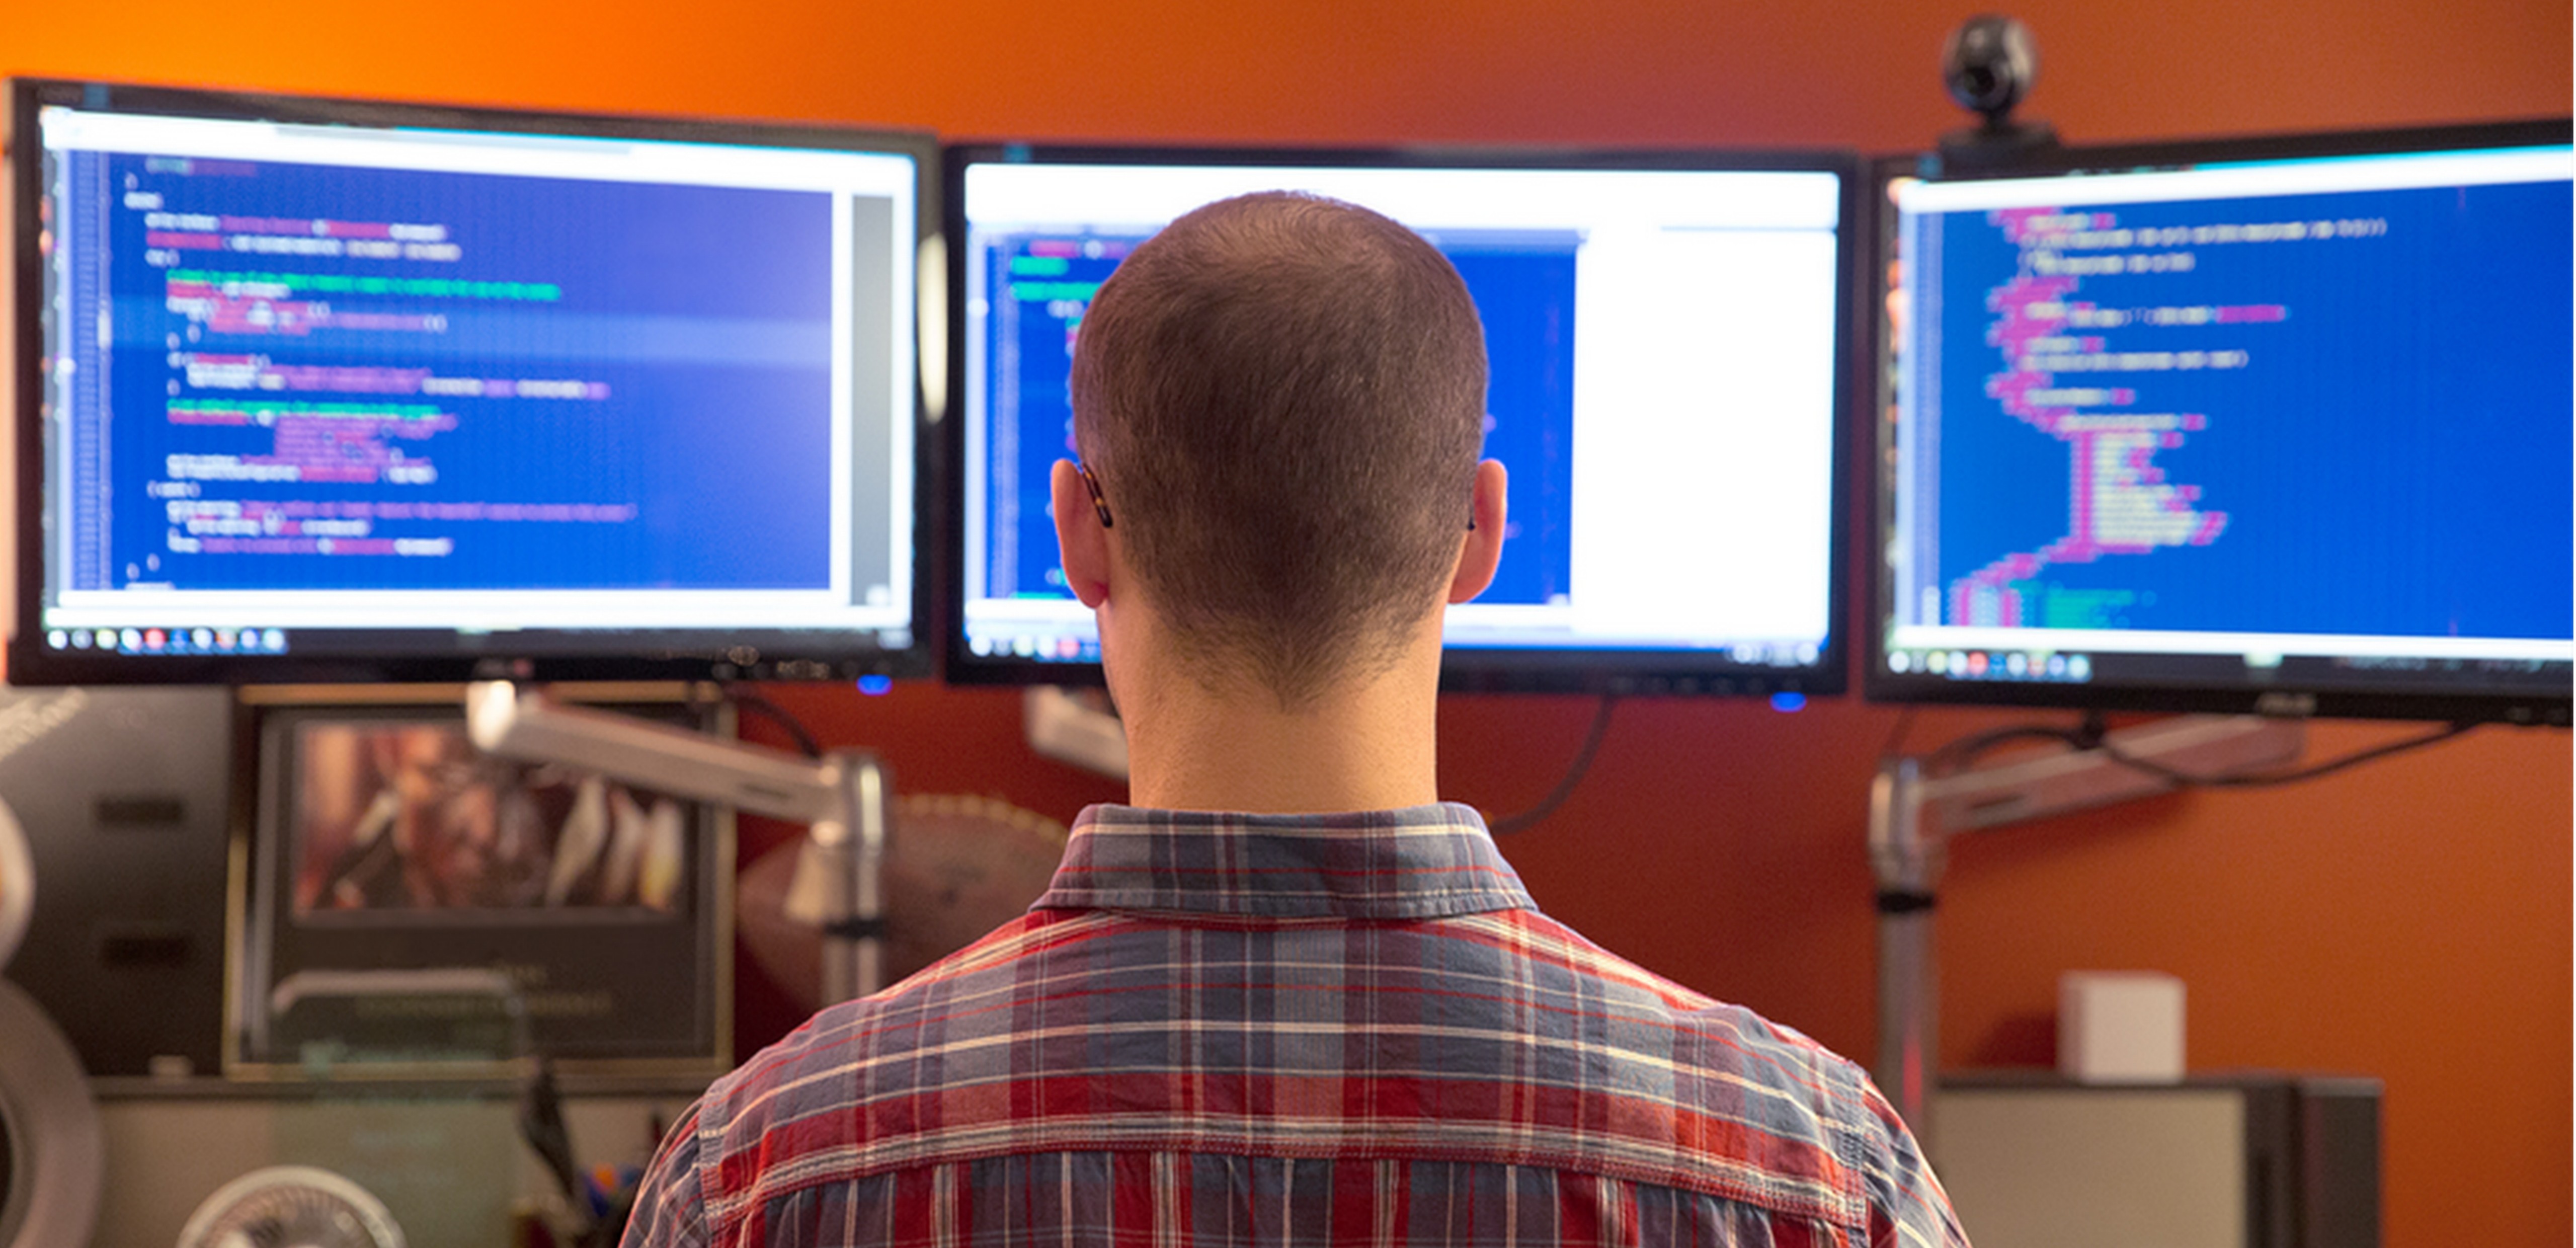 Man in front of three monitors in an office, the back of his head is shown